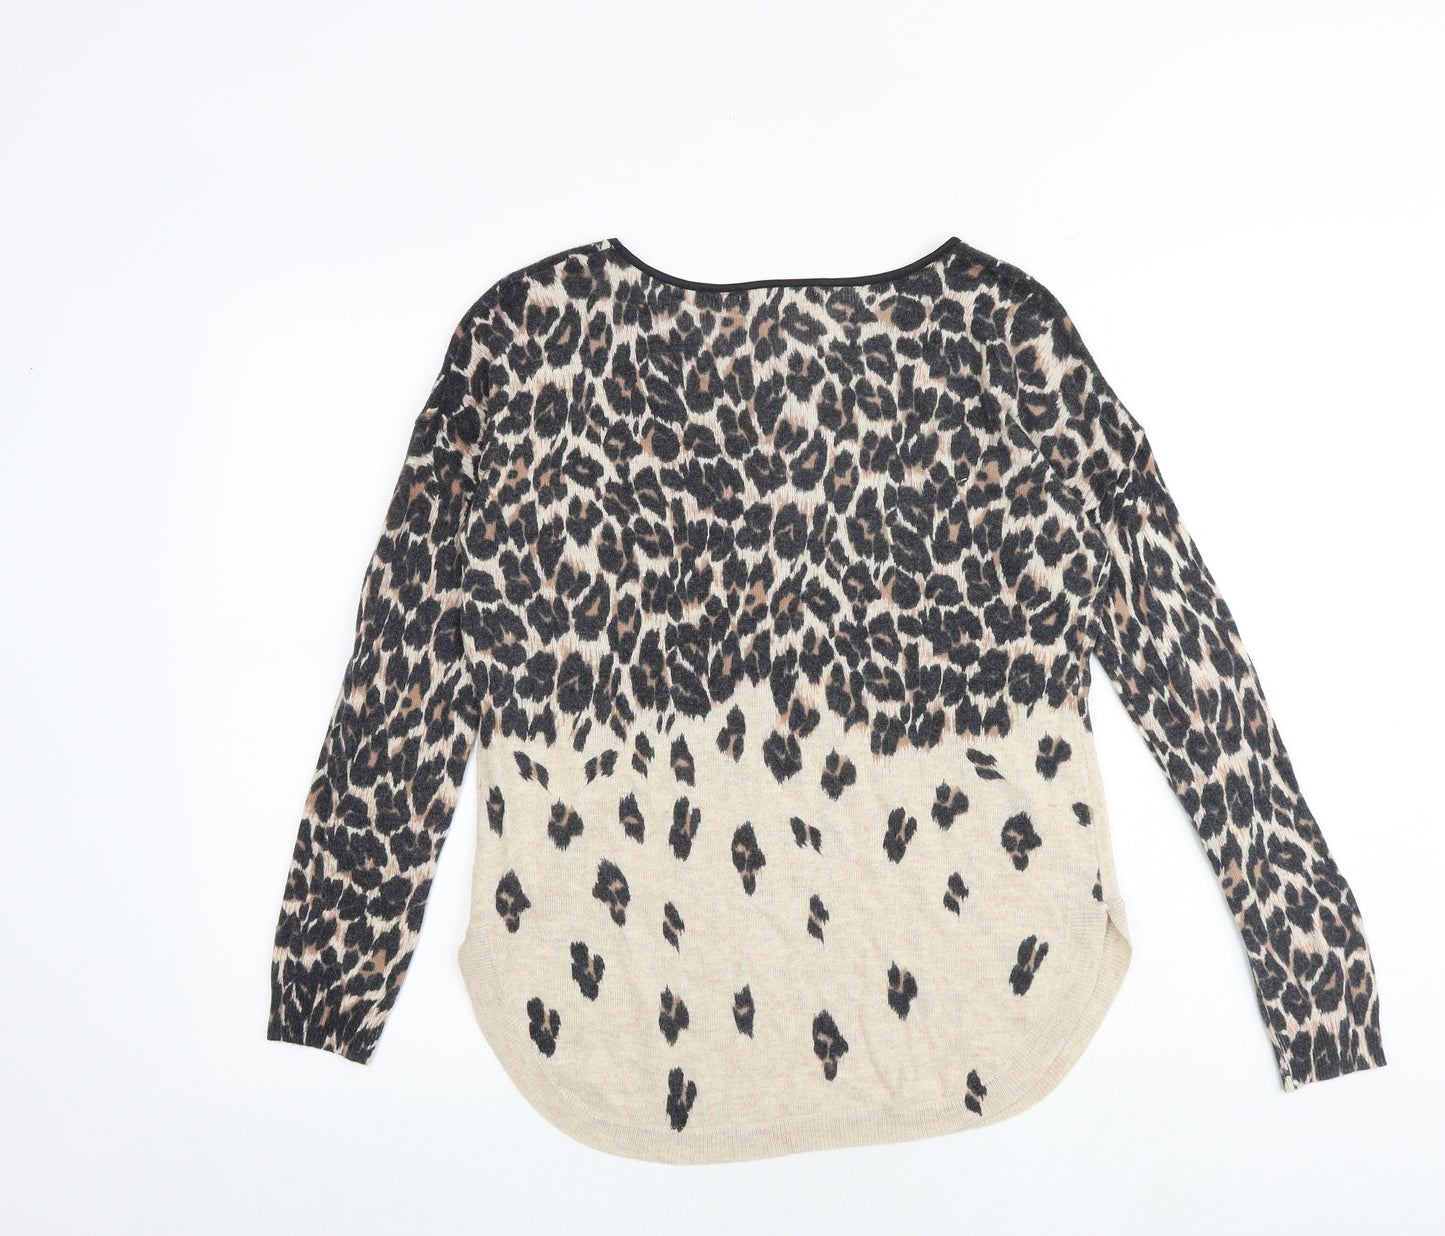 Oasis Womens Brown Round Neck Animal Print Viscose Pullover Jumper Size XS - Leopard Print